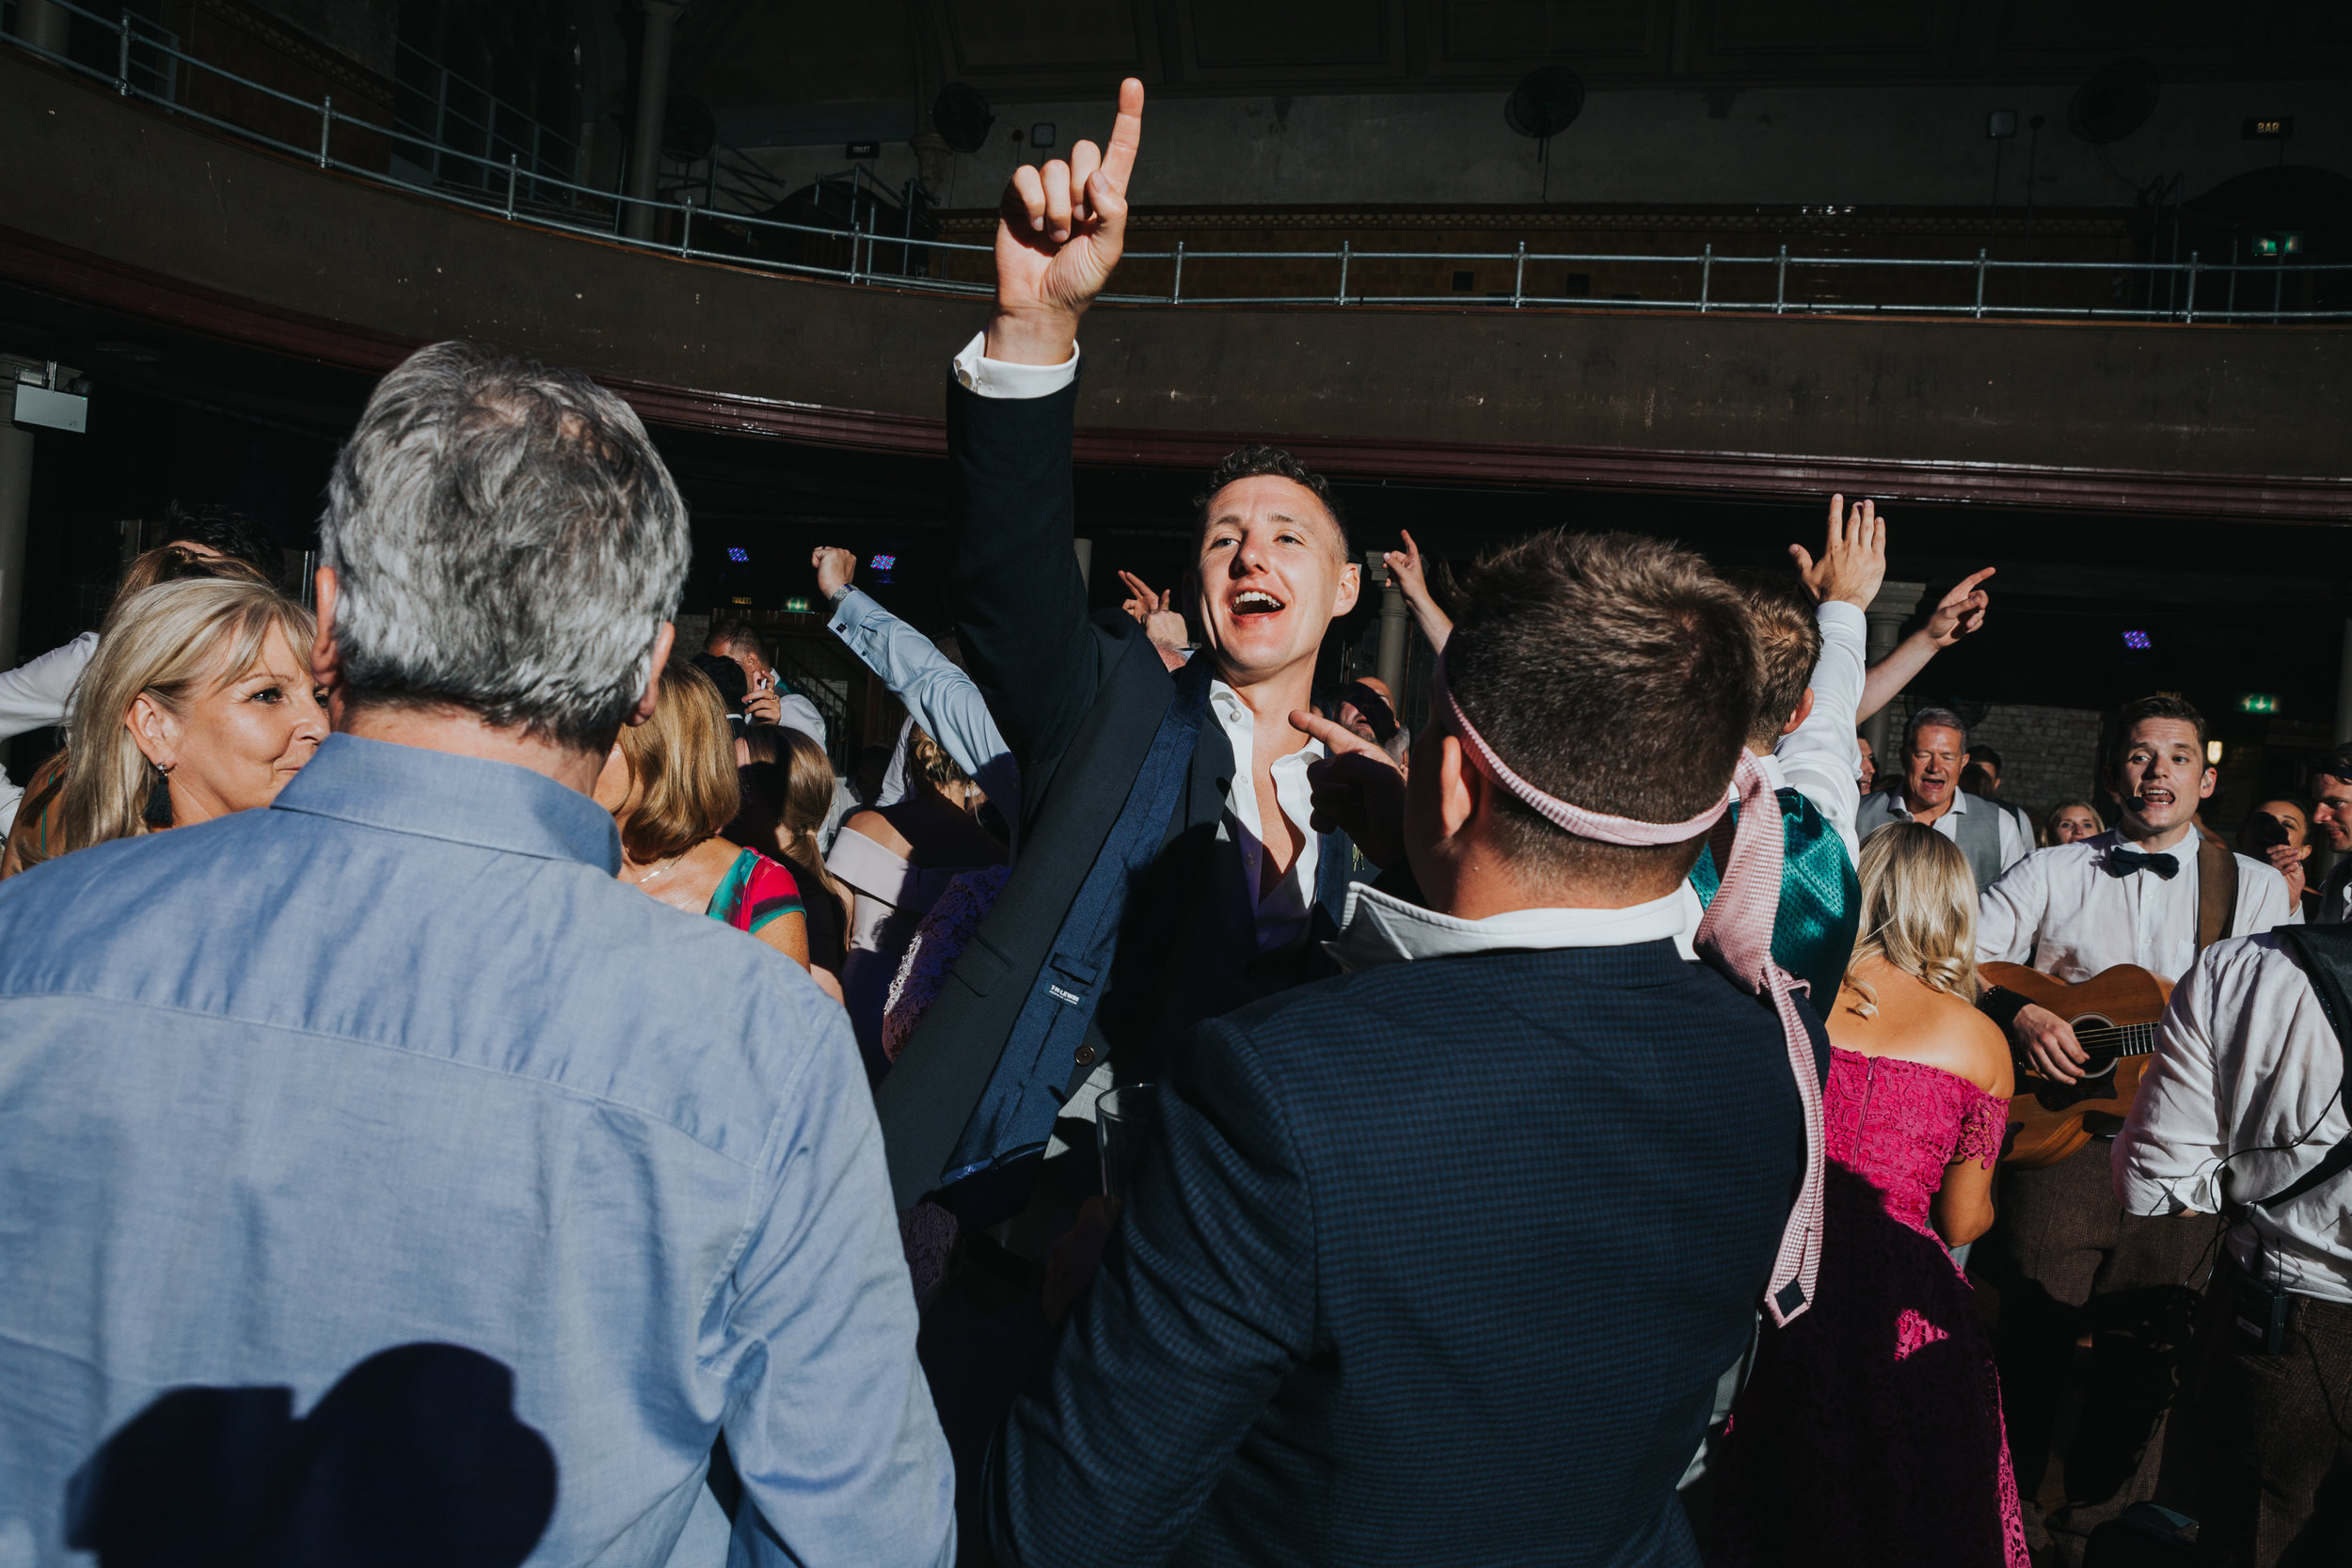 Male weddings guests dance with their ties tied around their heads, Rambo style. 